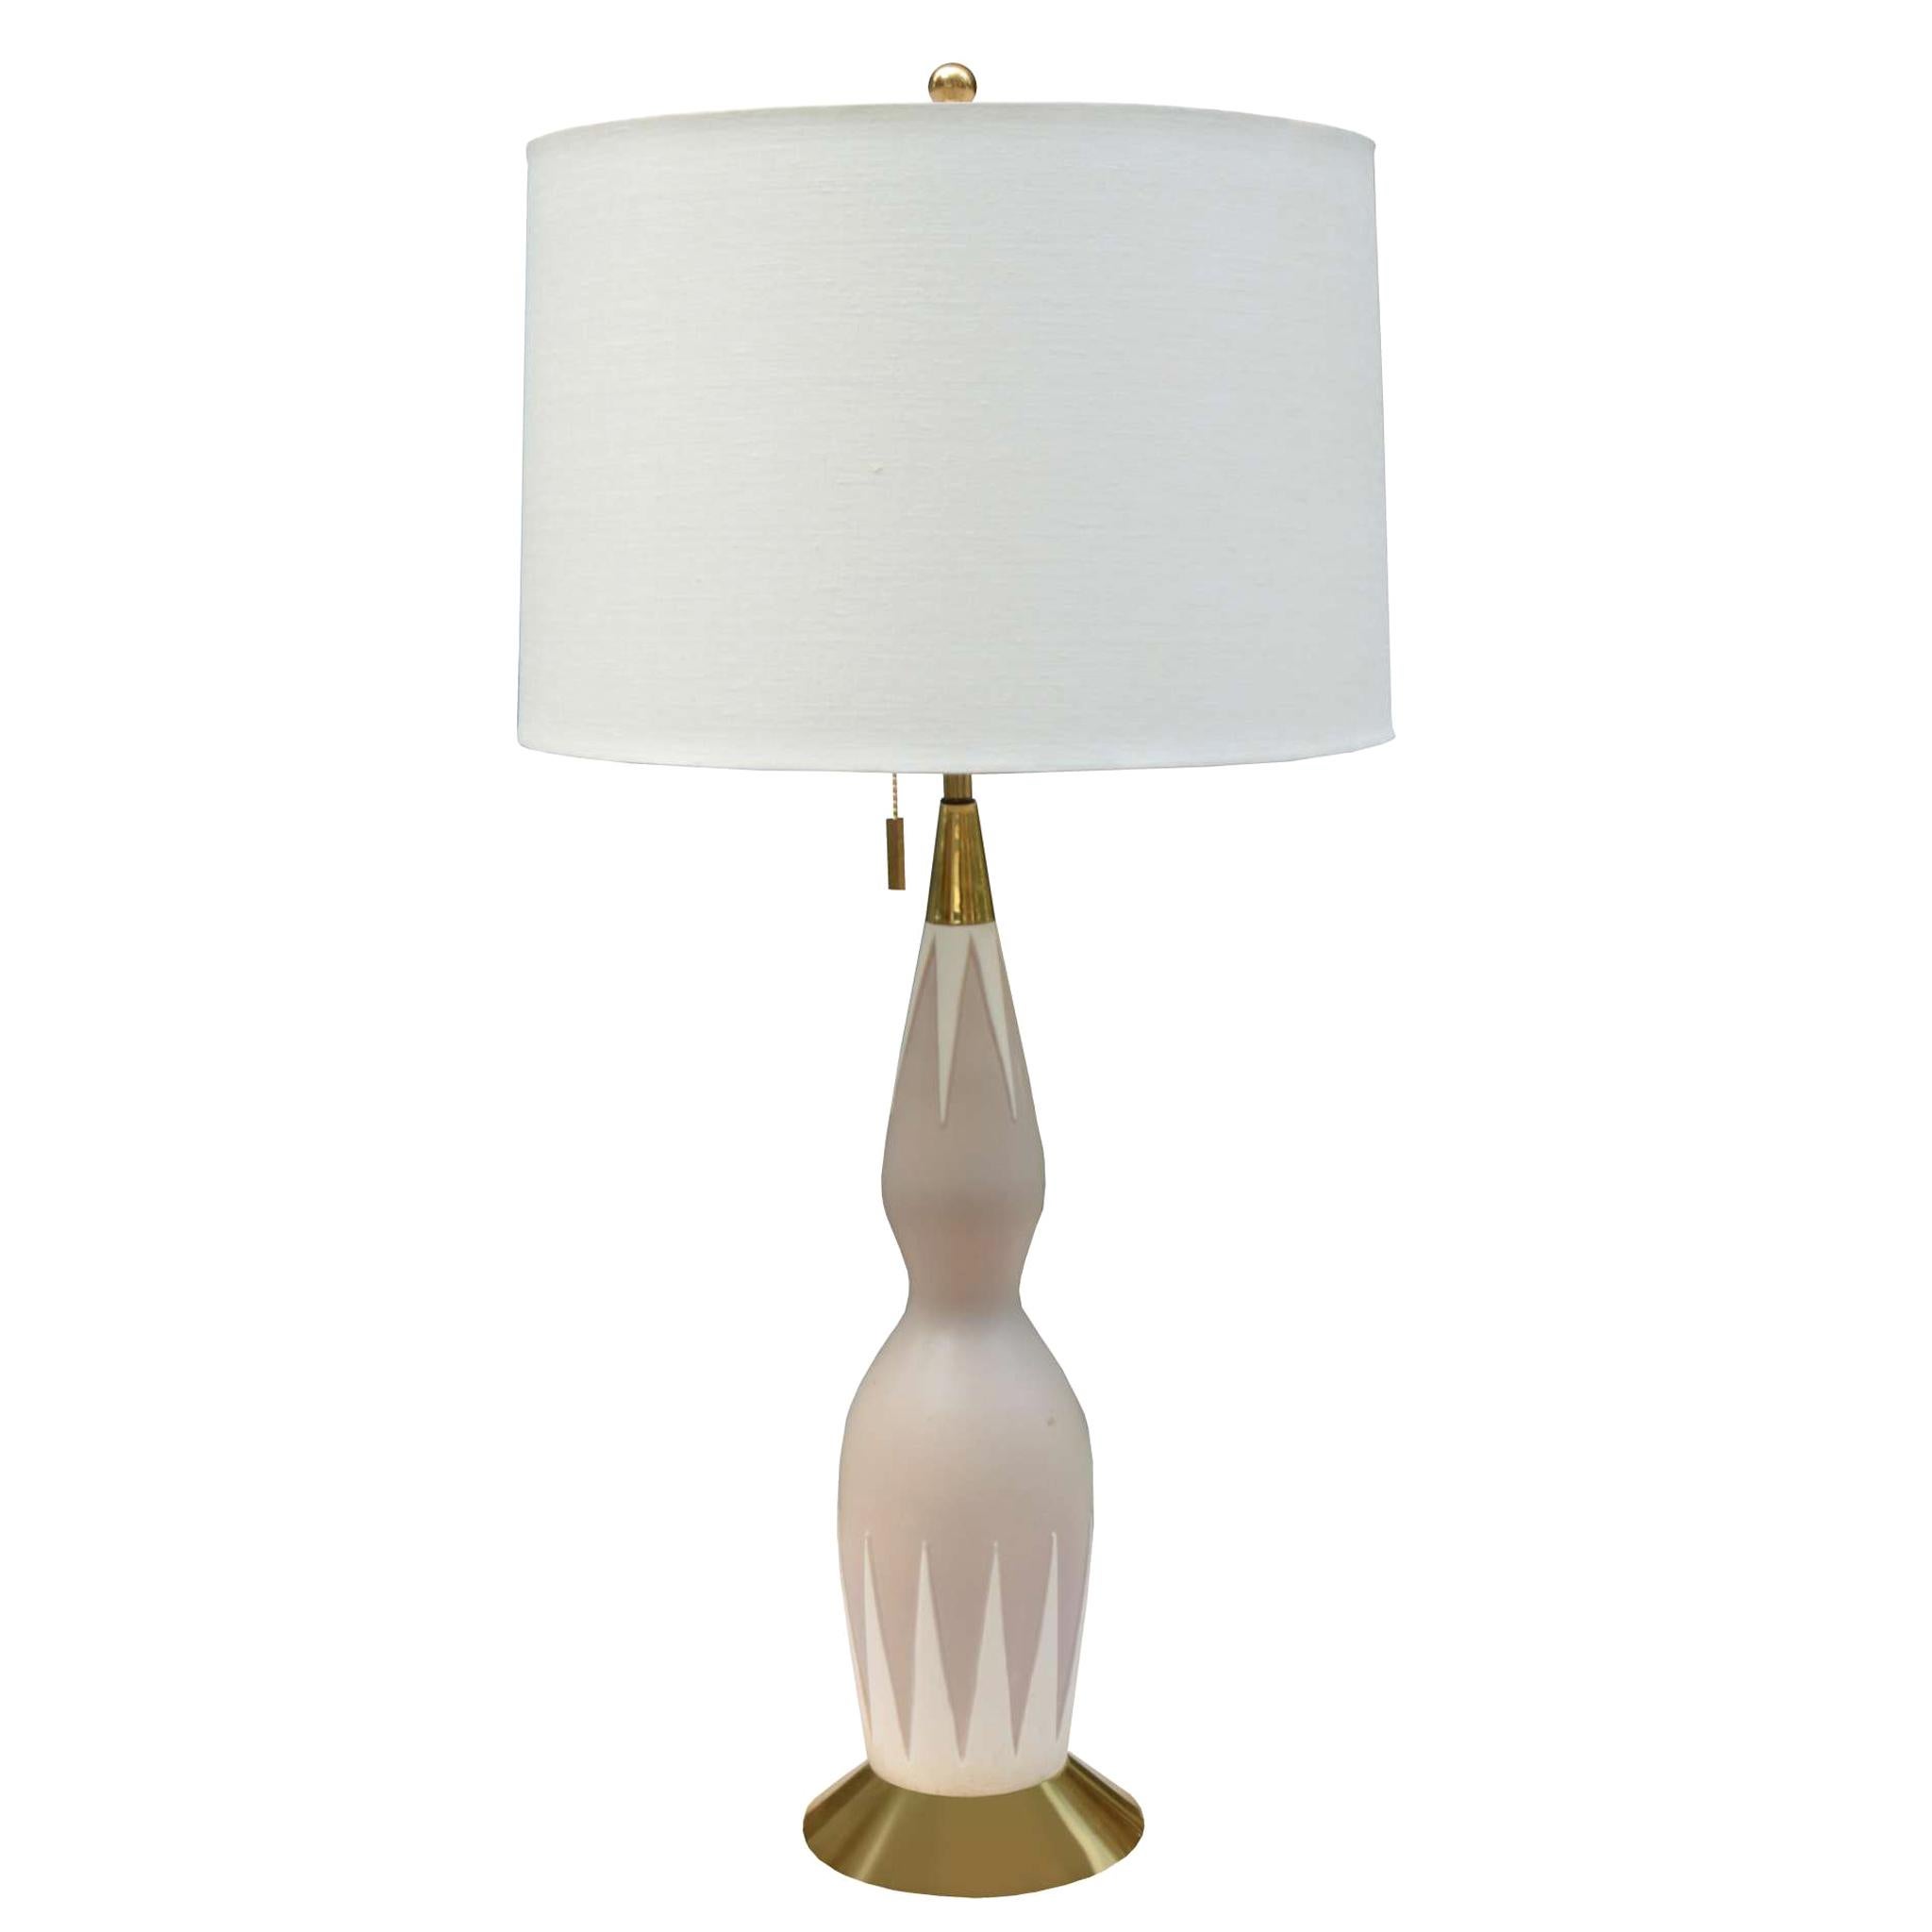 Gerald Thurston Single Table Lamp For Sale